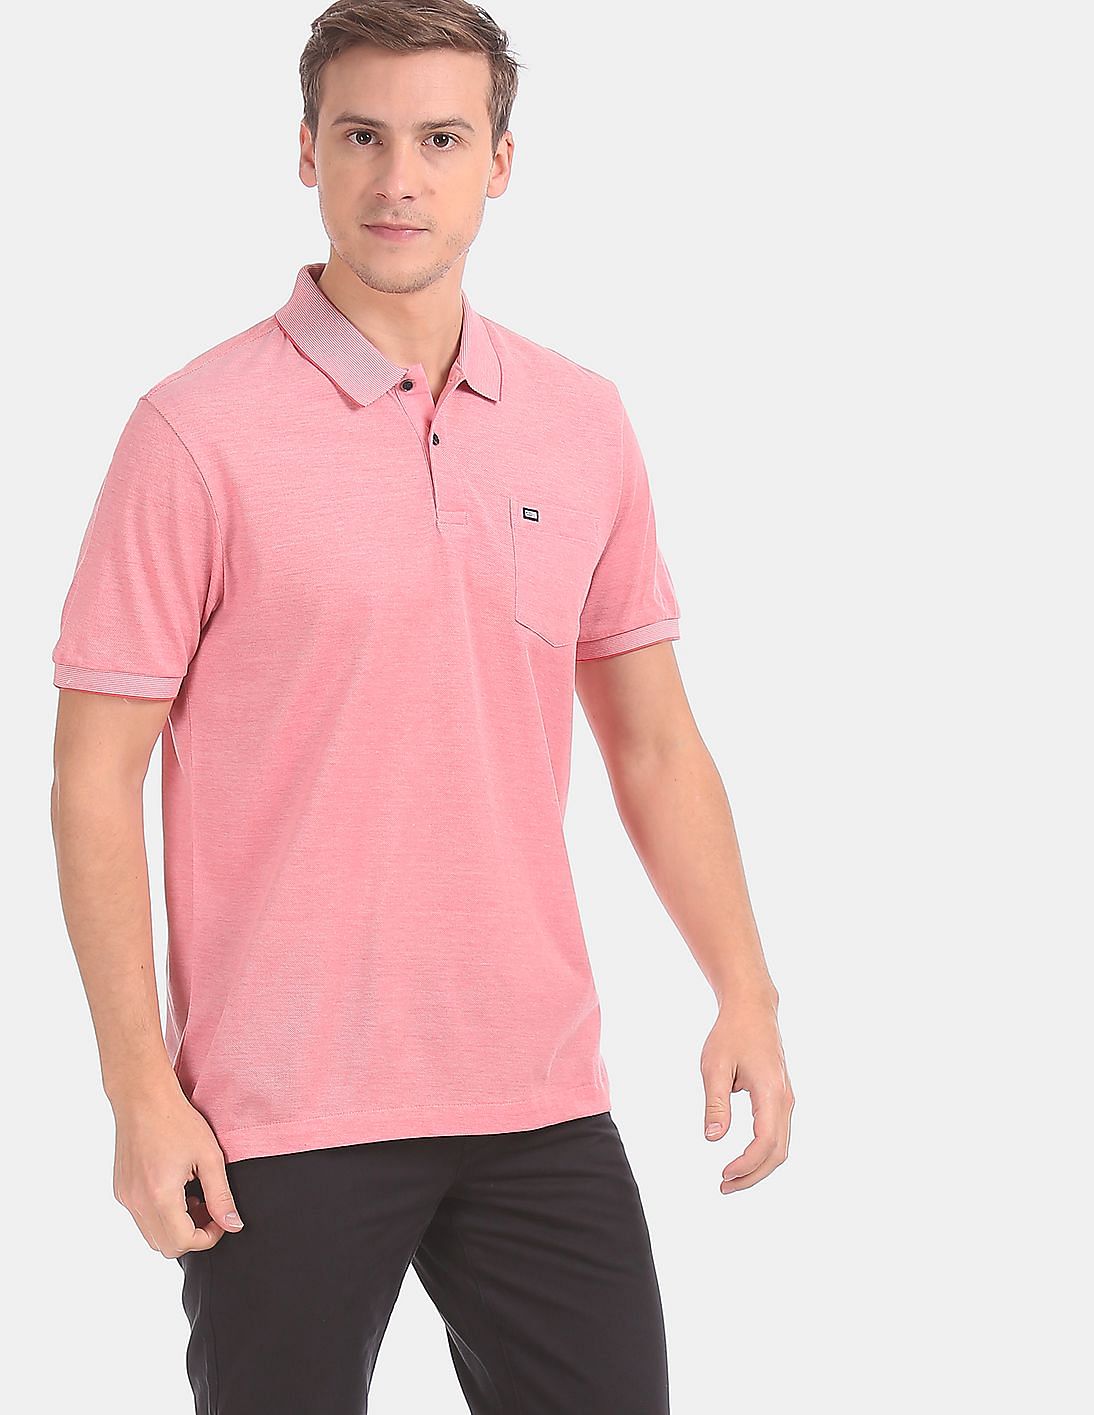 Buy Arrow Sports Pink Patch Pocket Tipped Polo Shirt - NNNOW.com